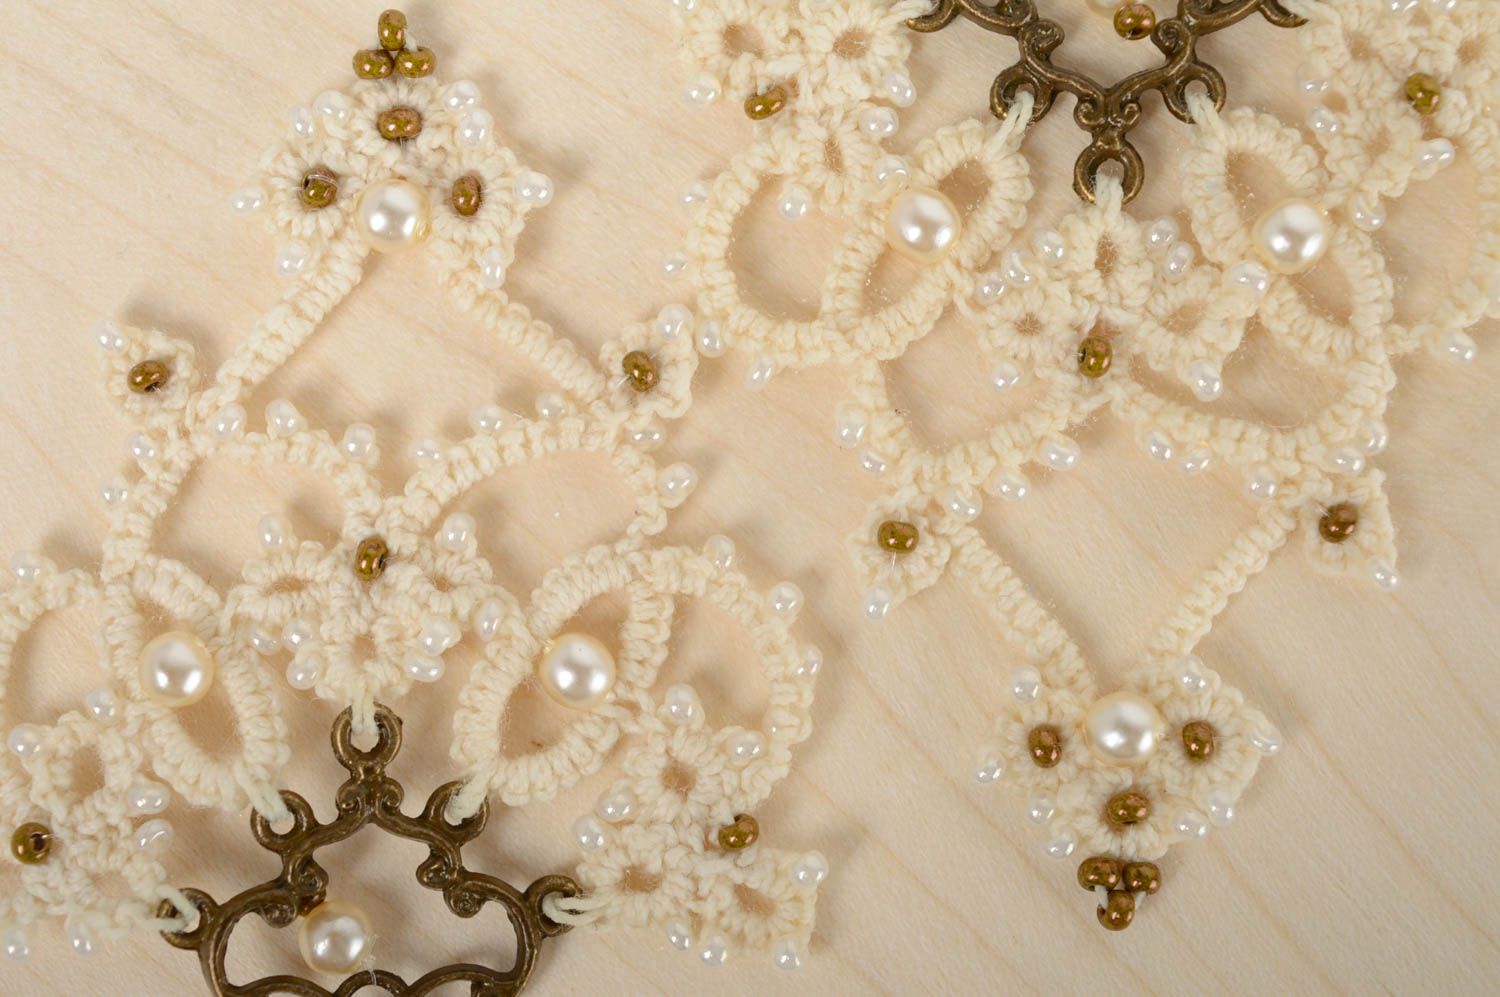 Textile earrings made using tatting and ankars techniques photo 2